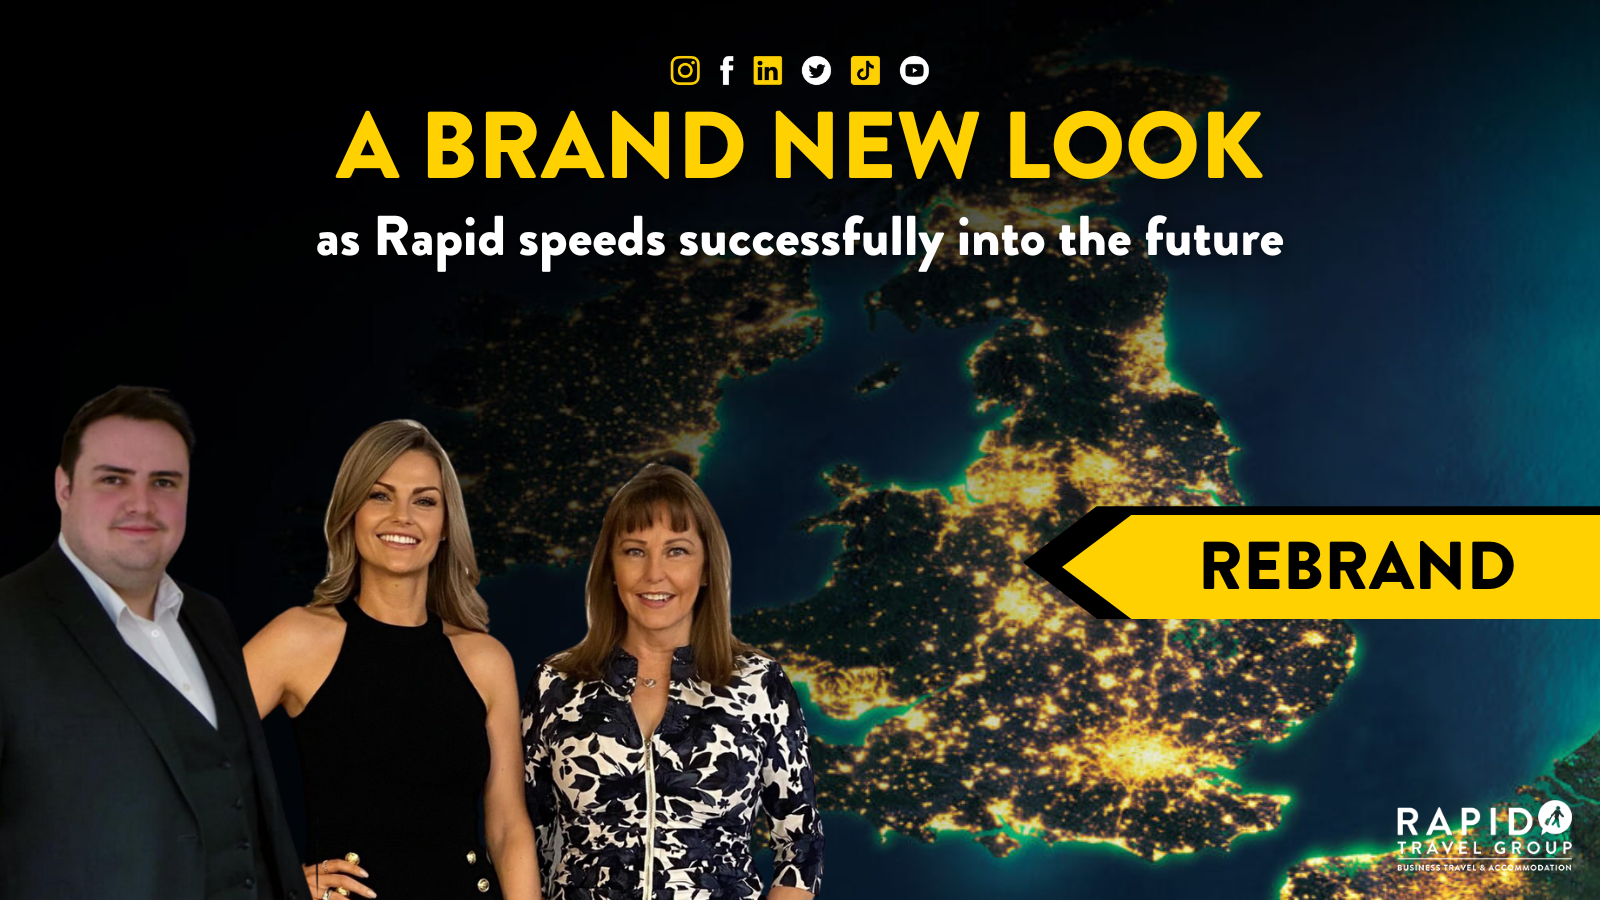 A Brand New Look as Rapid speeds successfully into the future